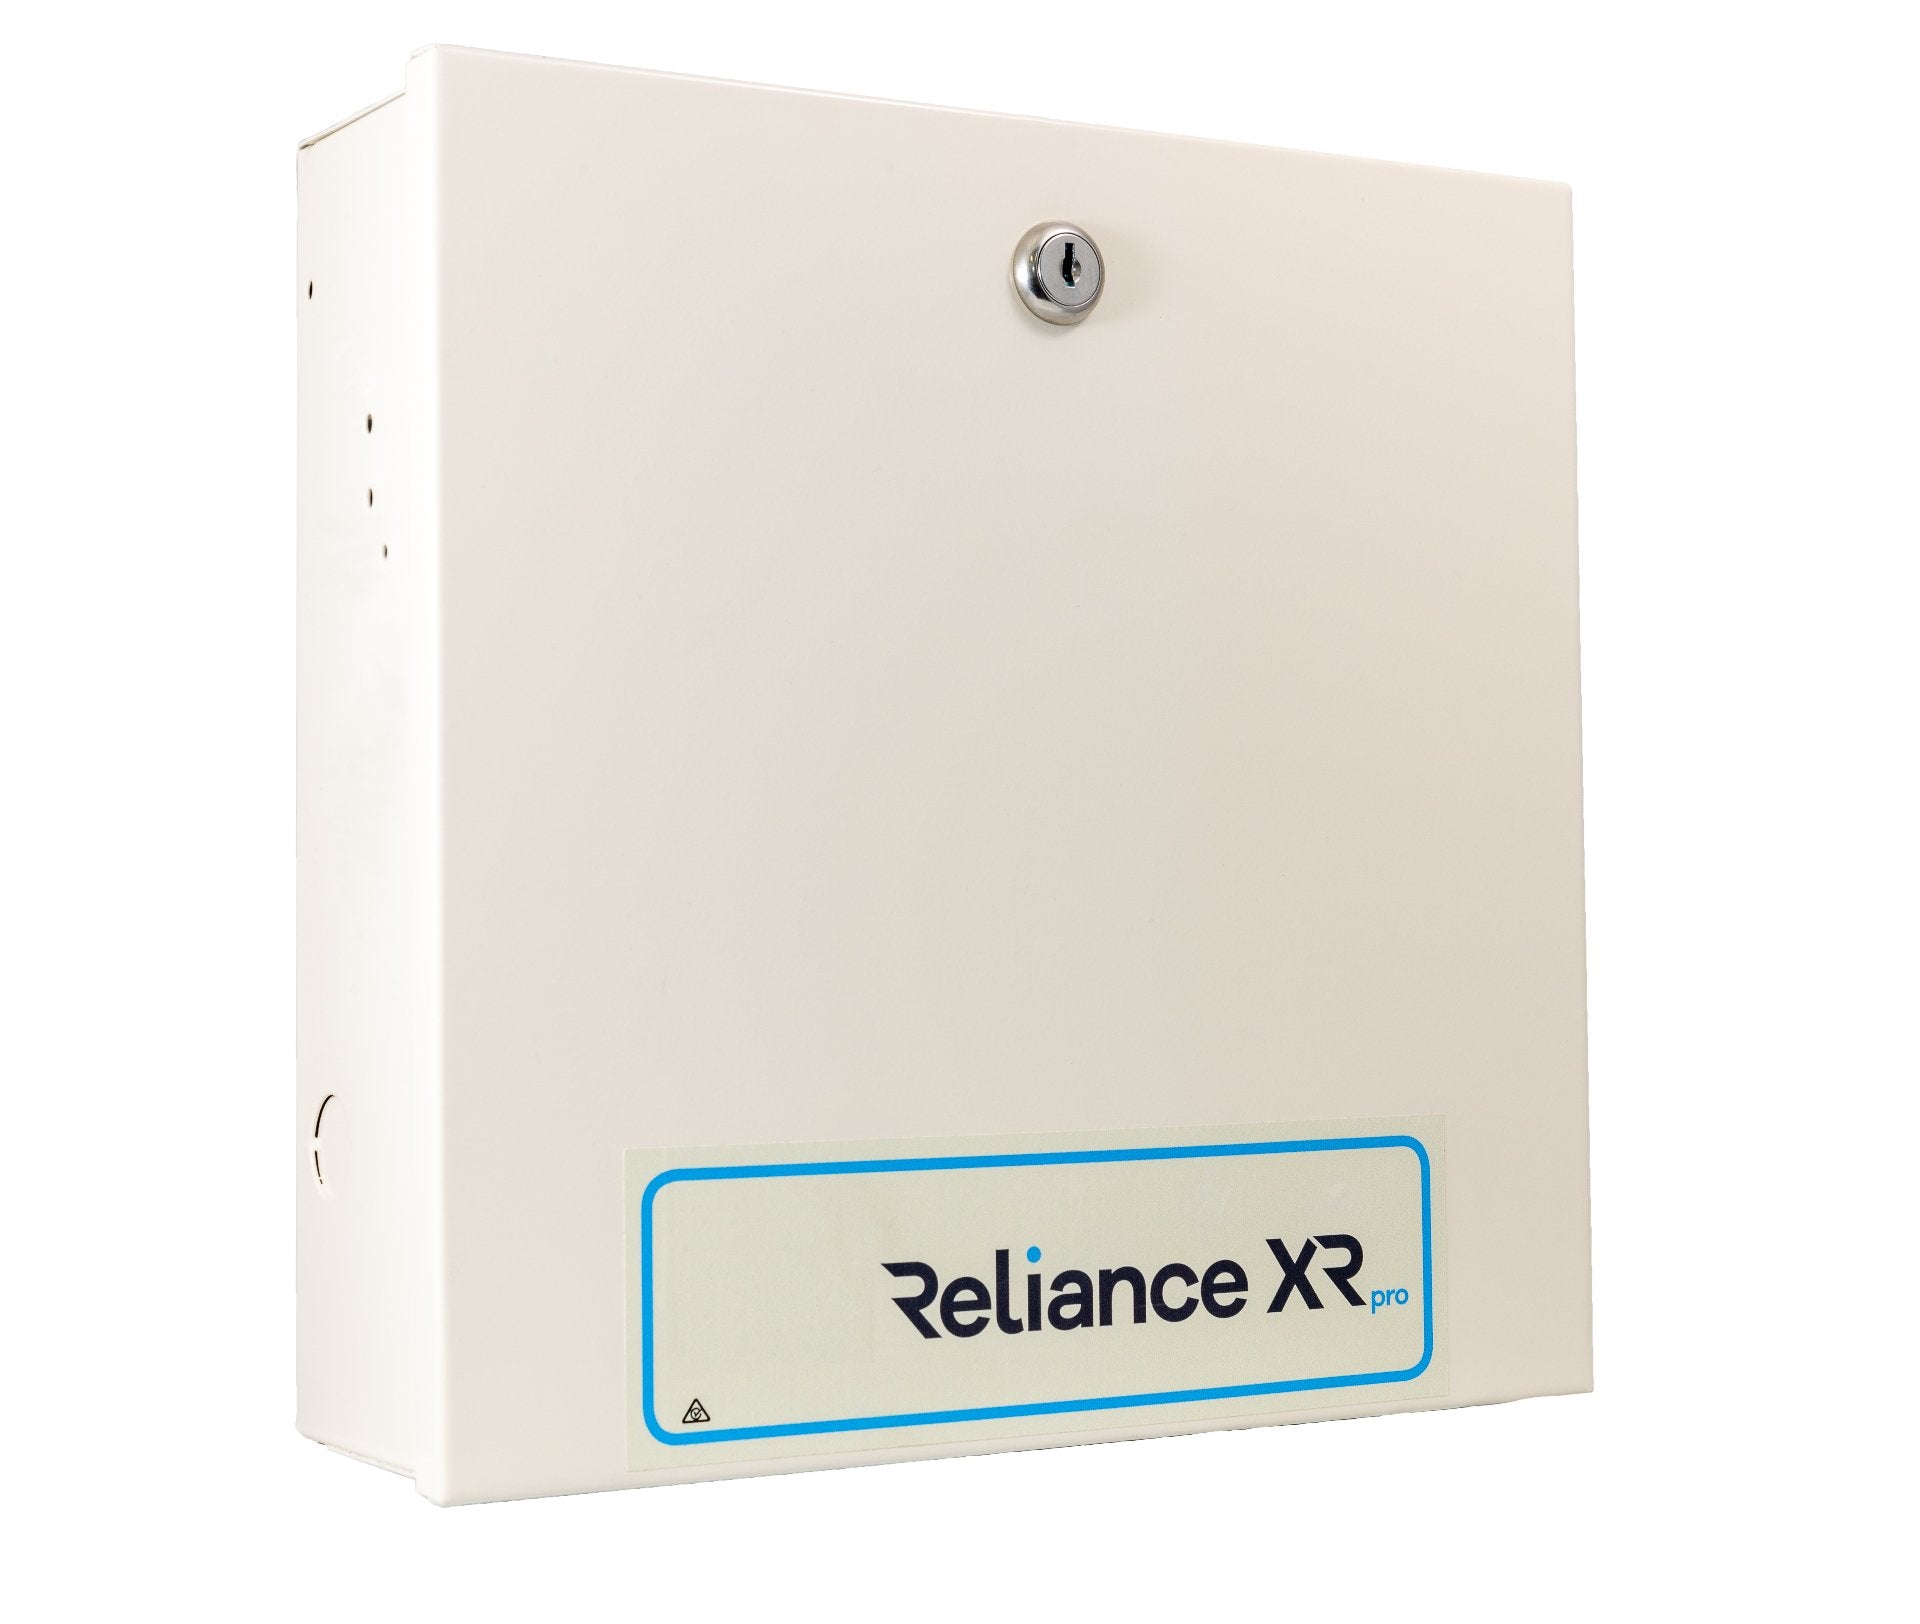 Reliance XR Pro Hybrid Control Panel In Metal Enclosure (S110618)